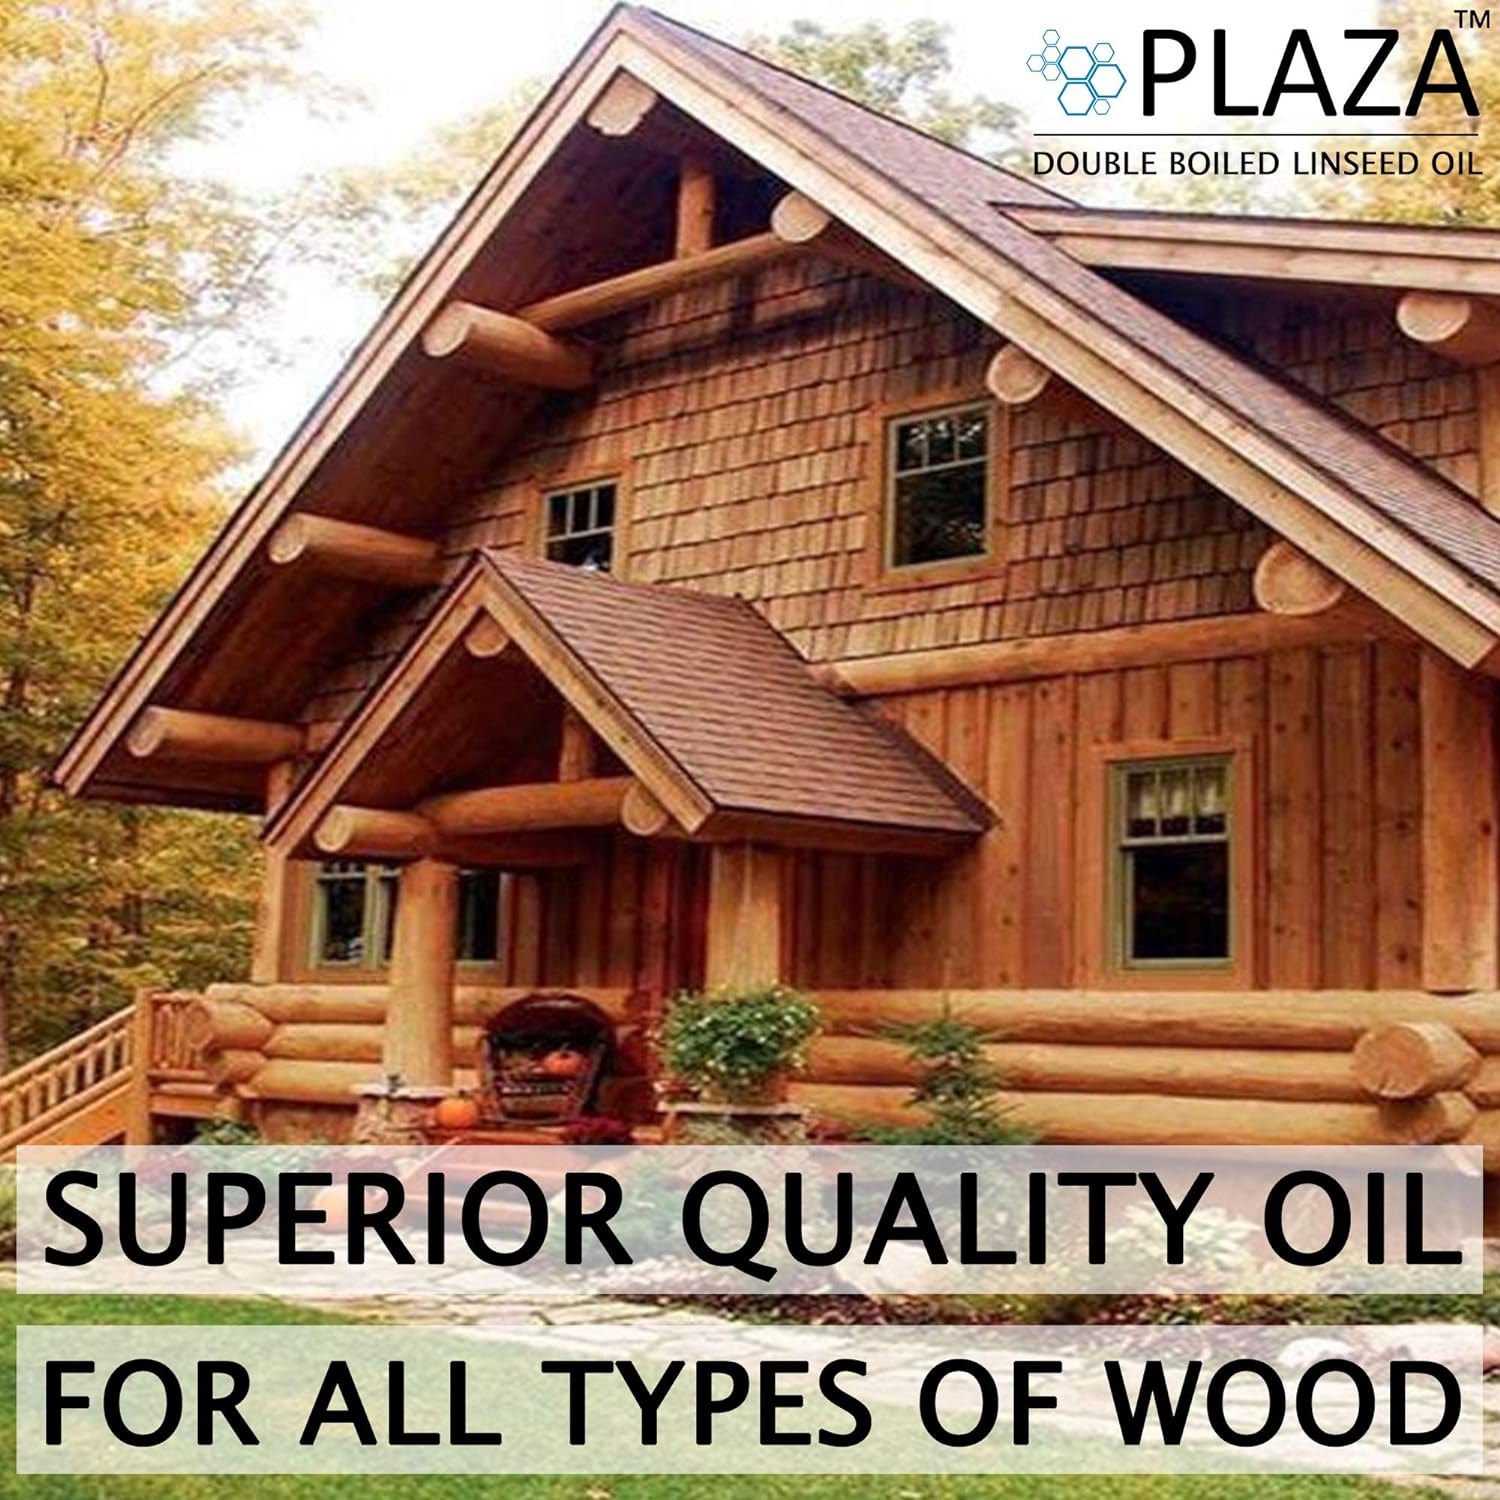 PLAZA - Double Boiled Linseed Oil - 100 ml Pack used for Wood Finishing, On Walls before applying paint, mixing in putty, bare wooden furniture, outside wooden furniture, Cricket bats, hockey, guitar, : Health & Household